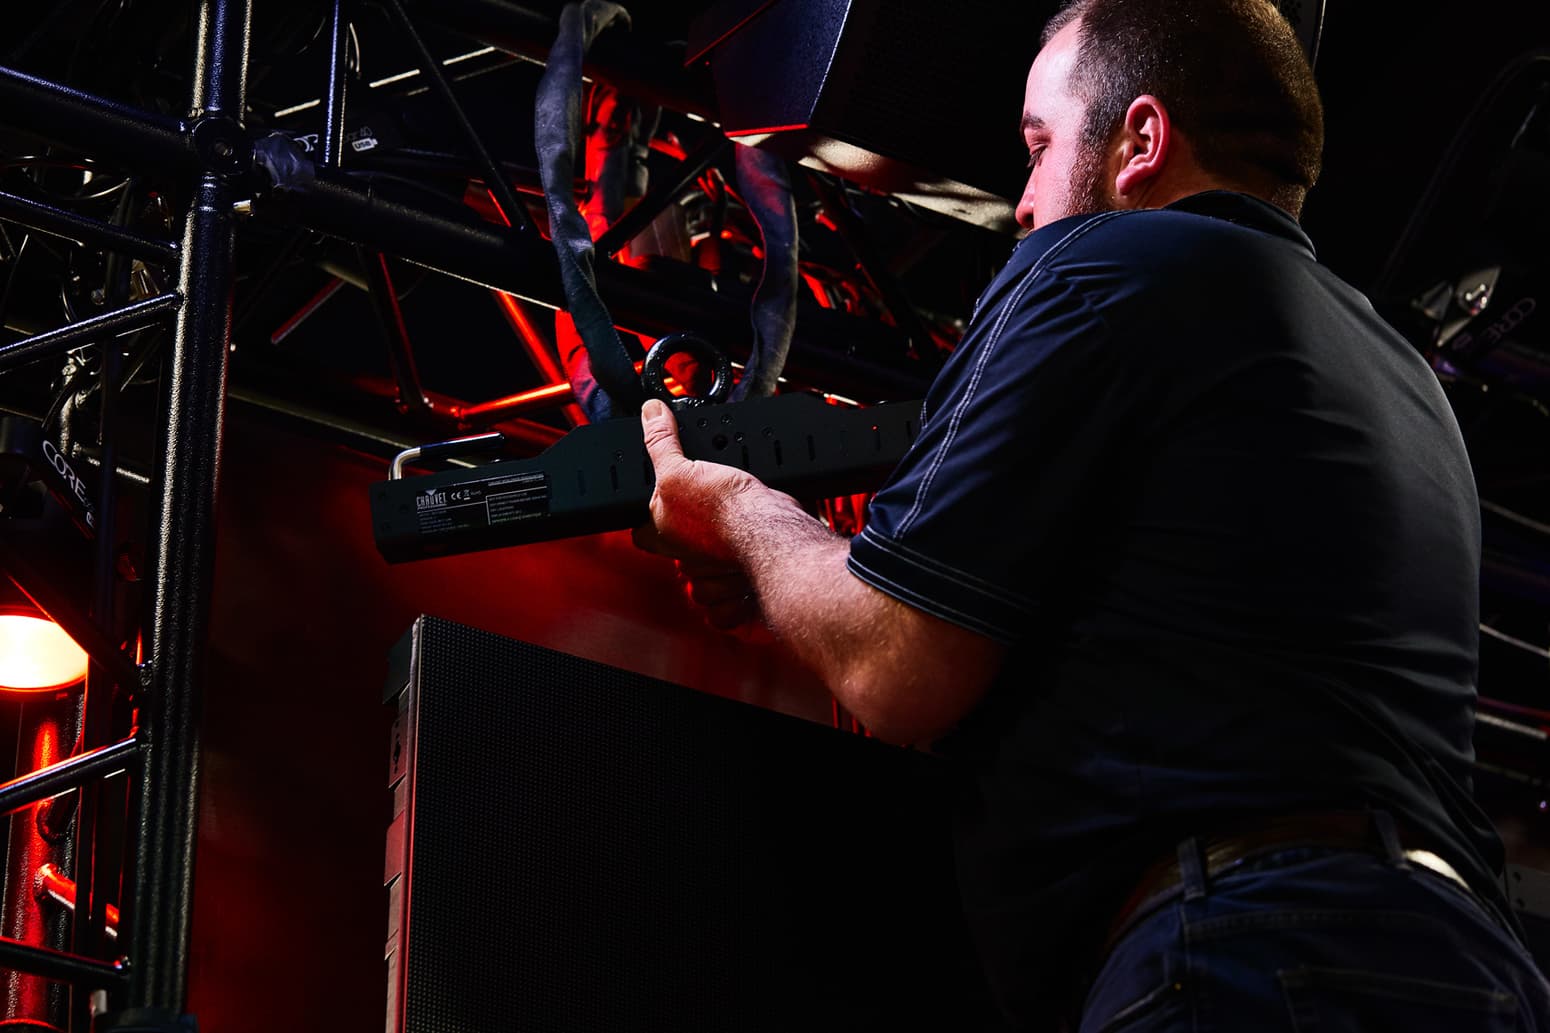 When it comes to entertainment rigging that's safe and strong, you need Paragon 360.